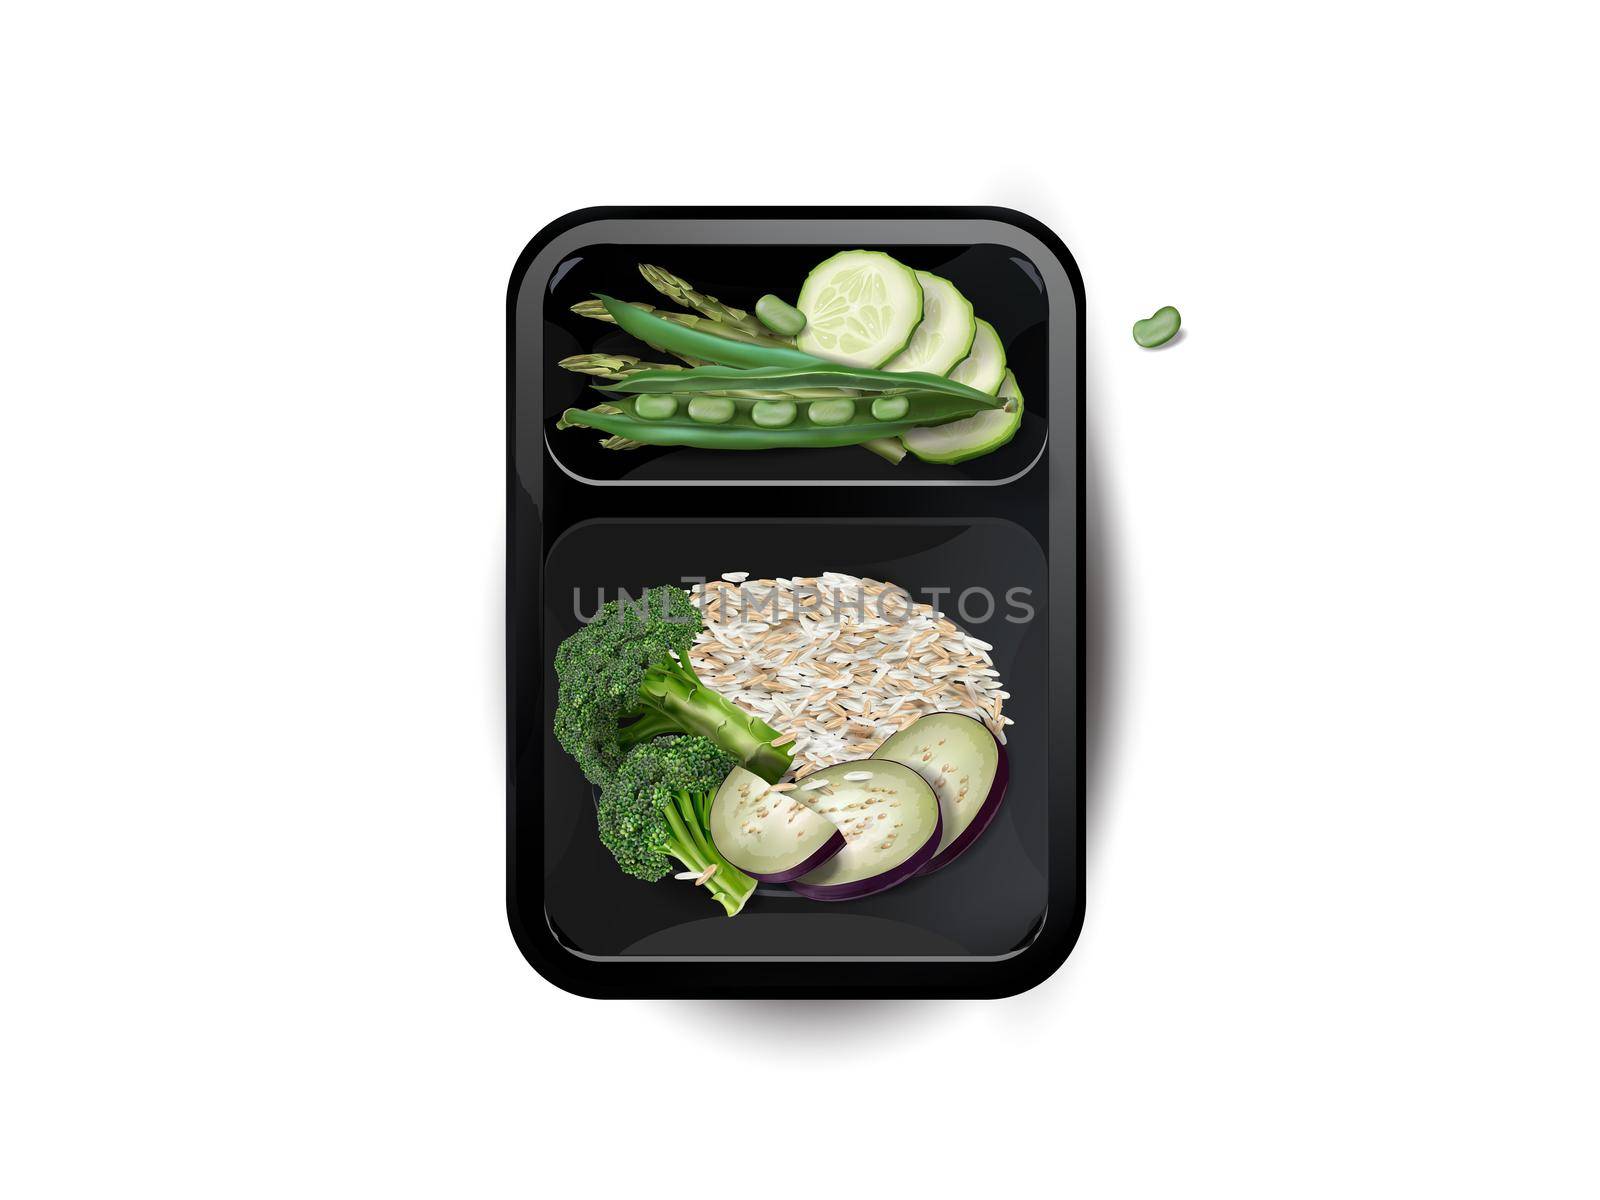 Steamed rice with vegetables in a lunchbox. by ConceptCafe